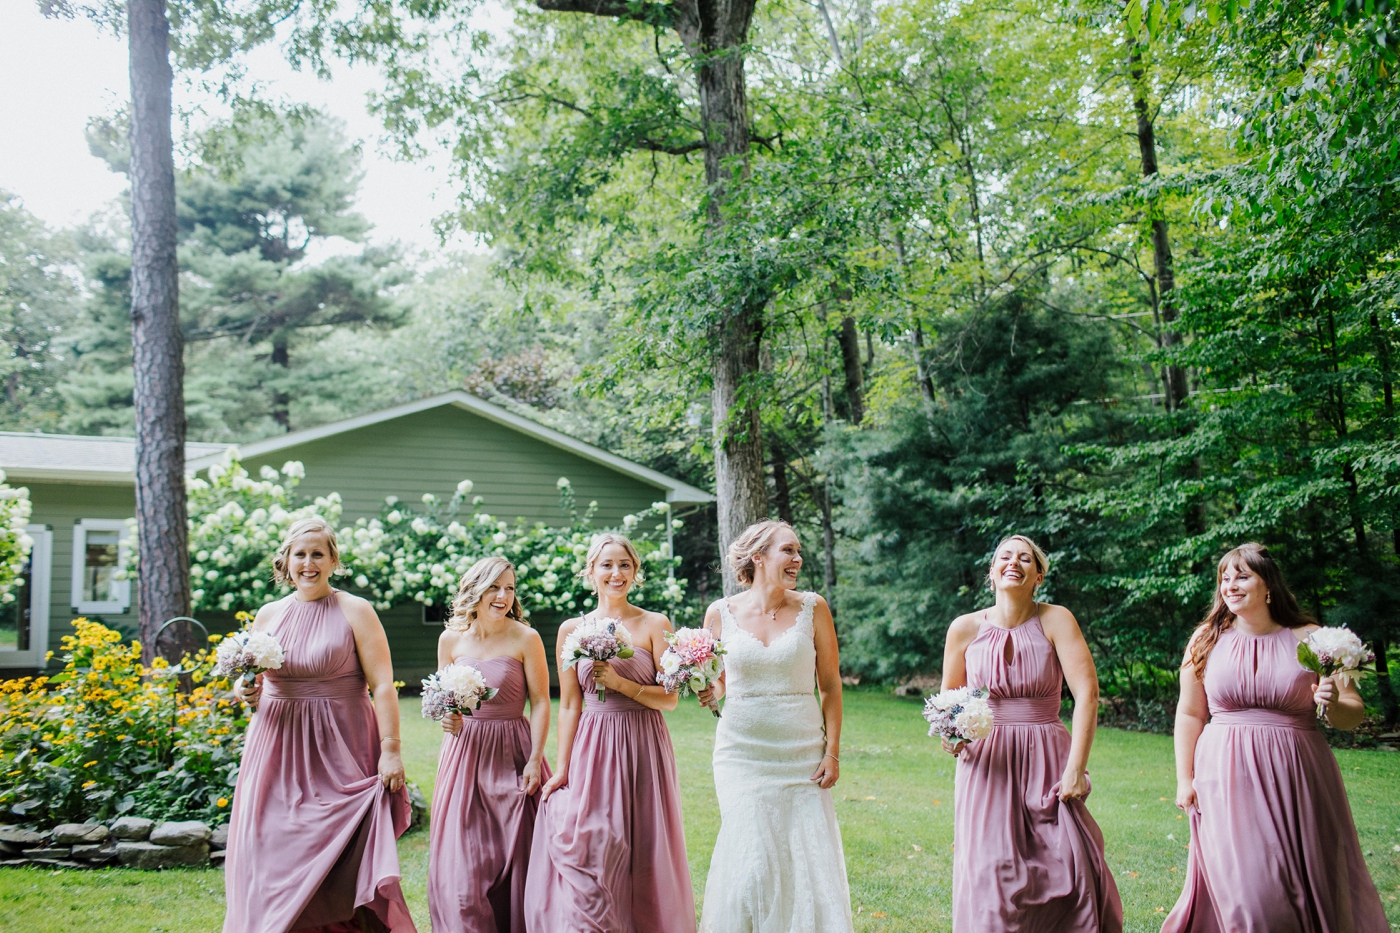 Bridesmaids in Wisteria chiffon gowns by Allure Bridesmaids